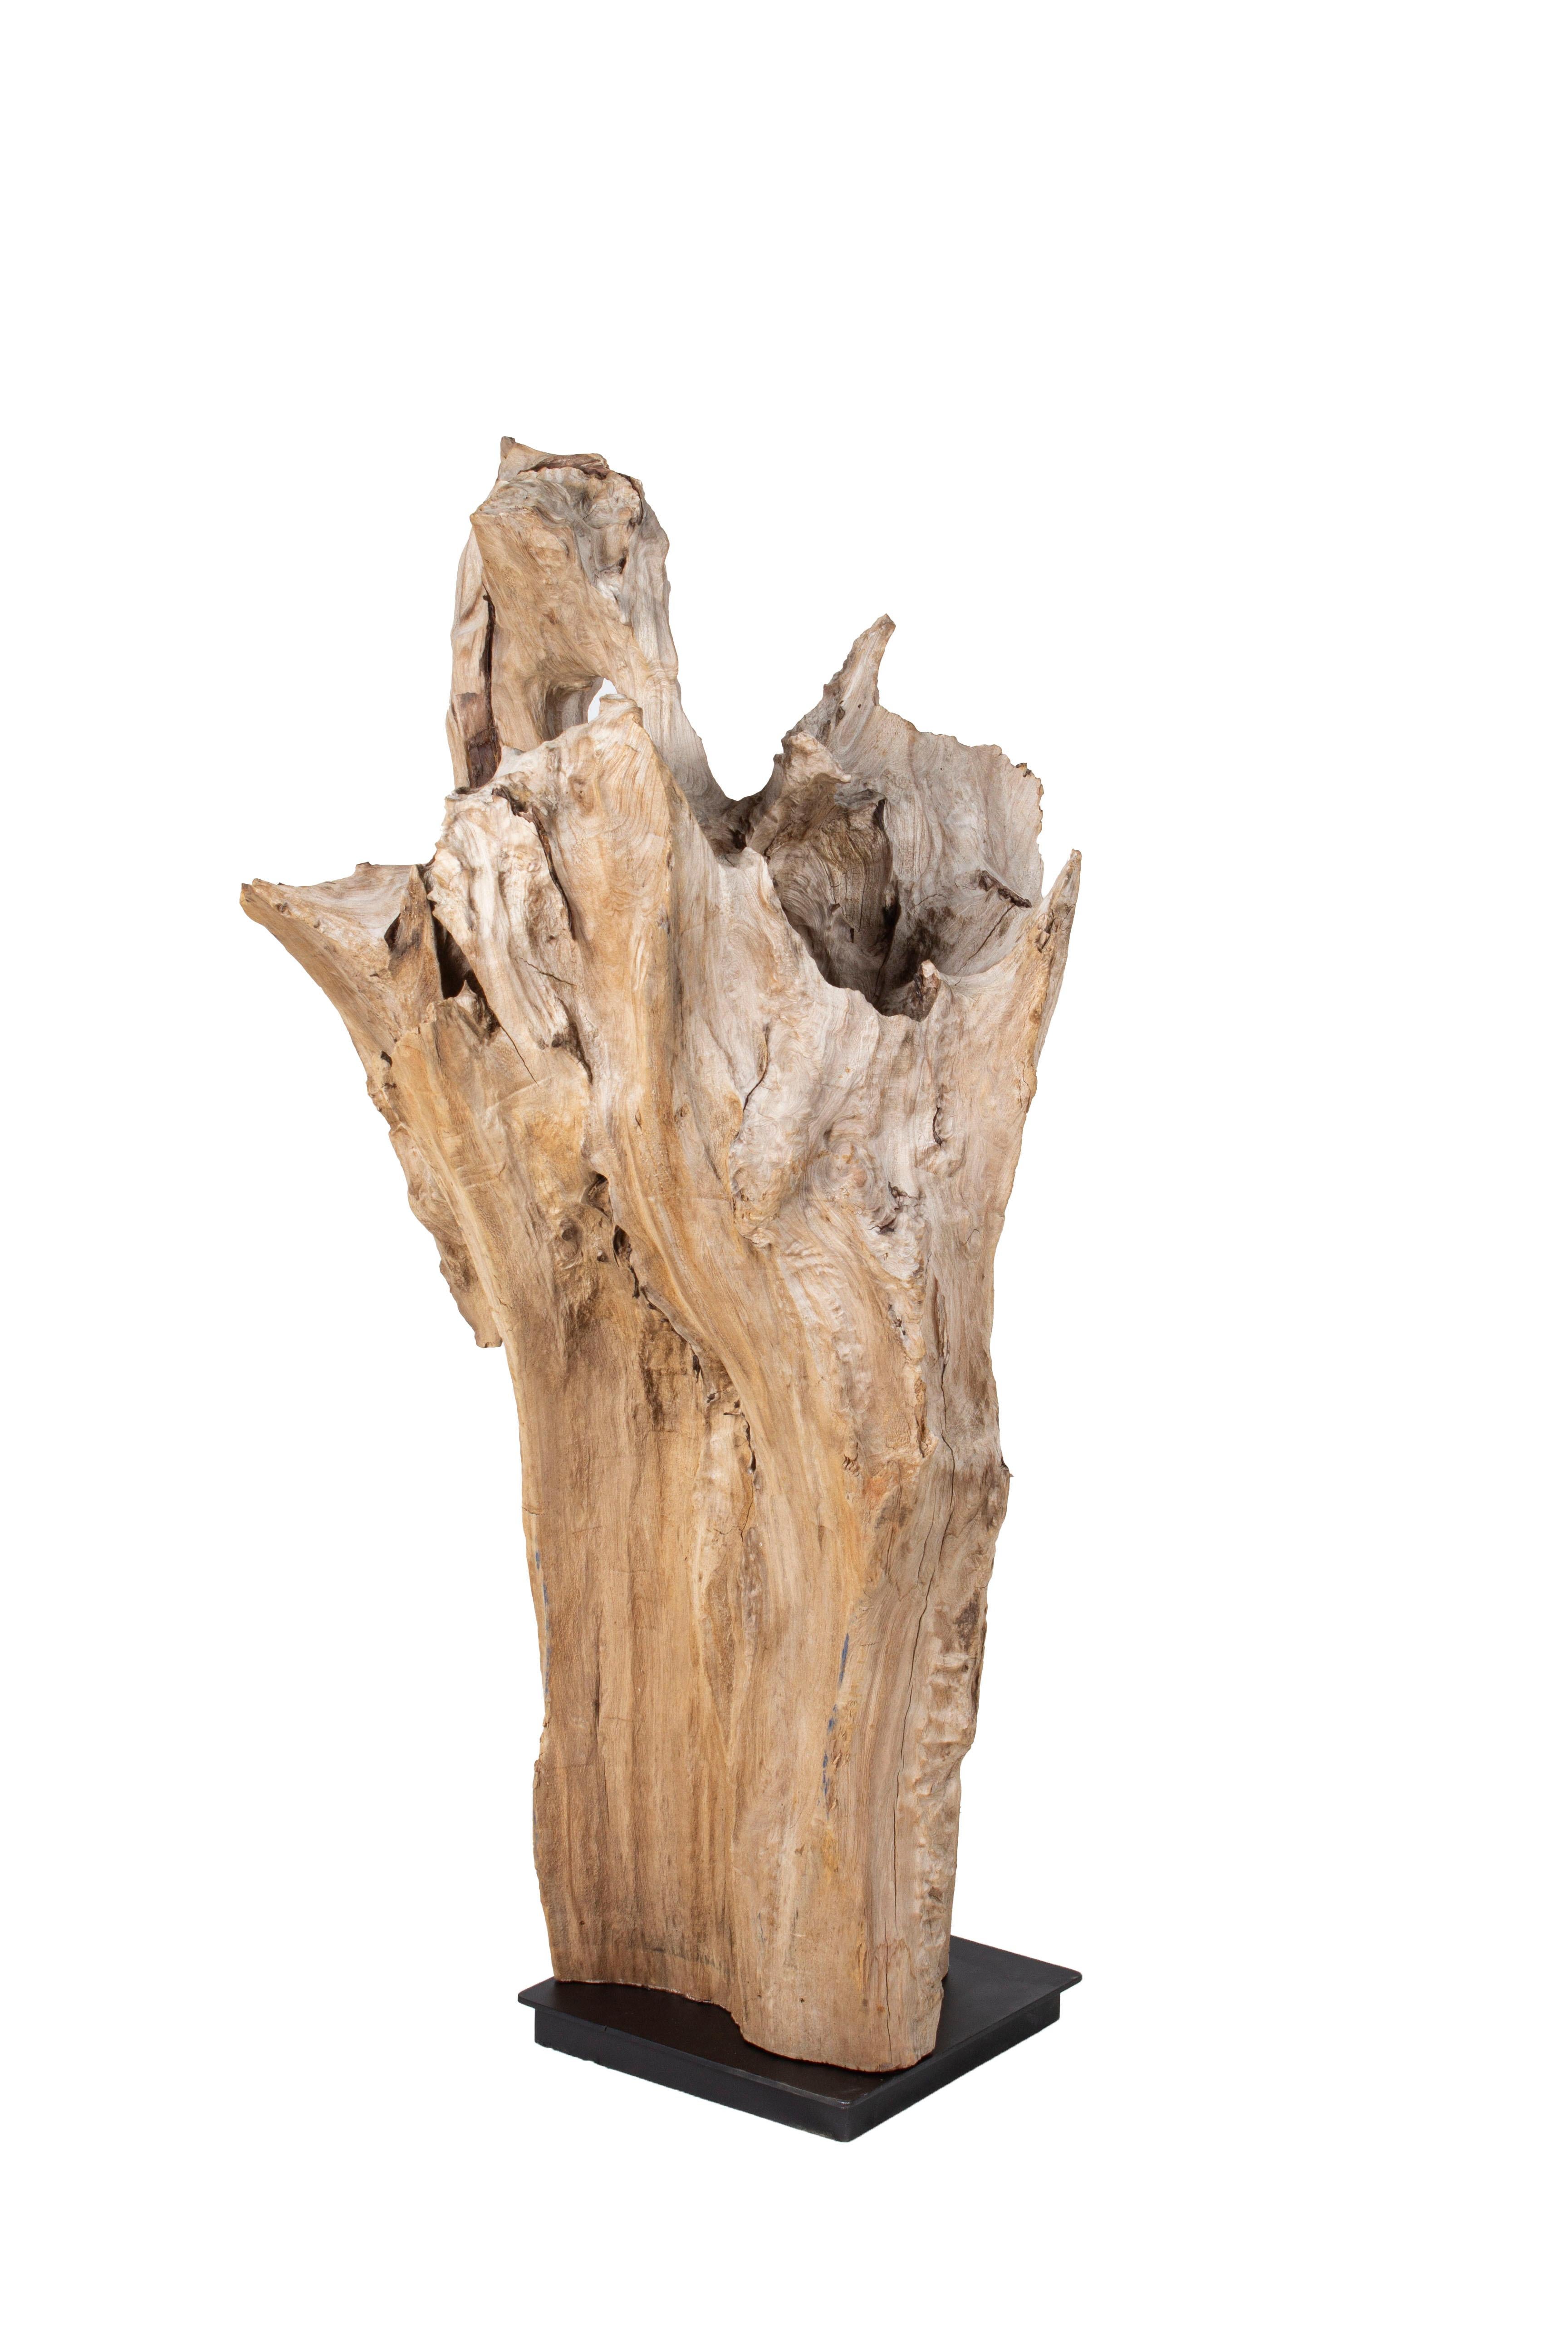 Sinker cypress wood organic sculpture in weathered gray patina on ebonized metal steel mount. 
Found in the coastal lowland areas of South Carolina. These cypress “sinker logs” reflect over 100 years of submerged artful deterioration. 

I paired